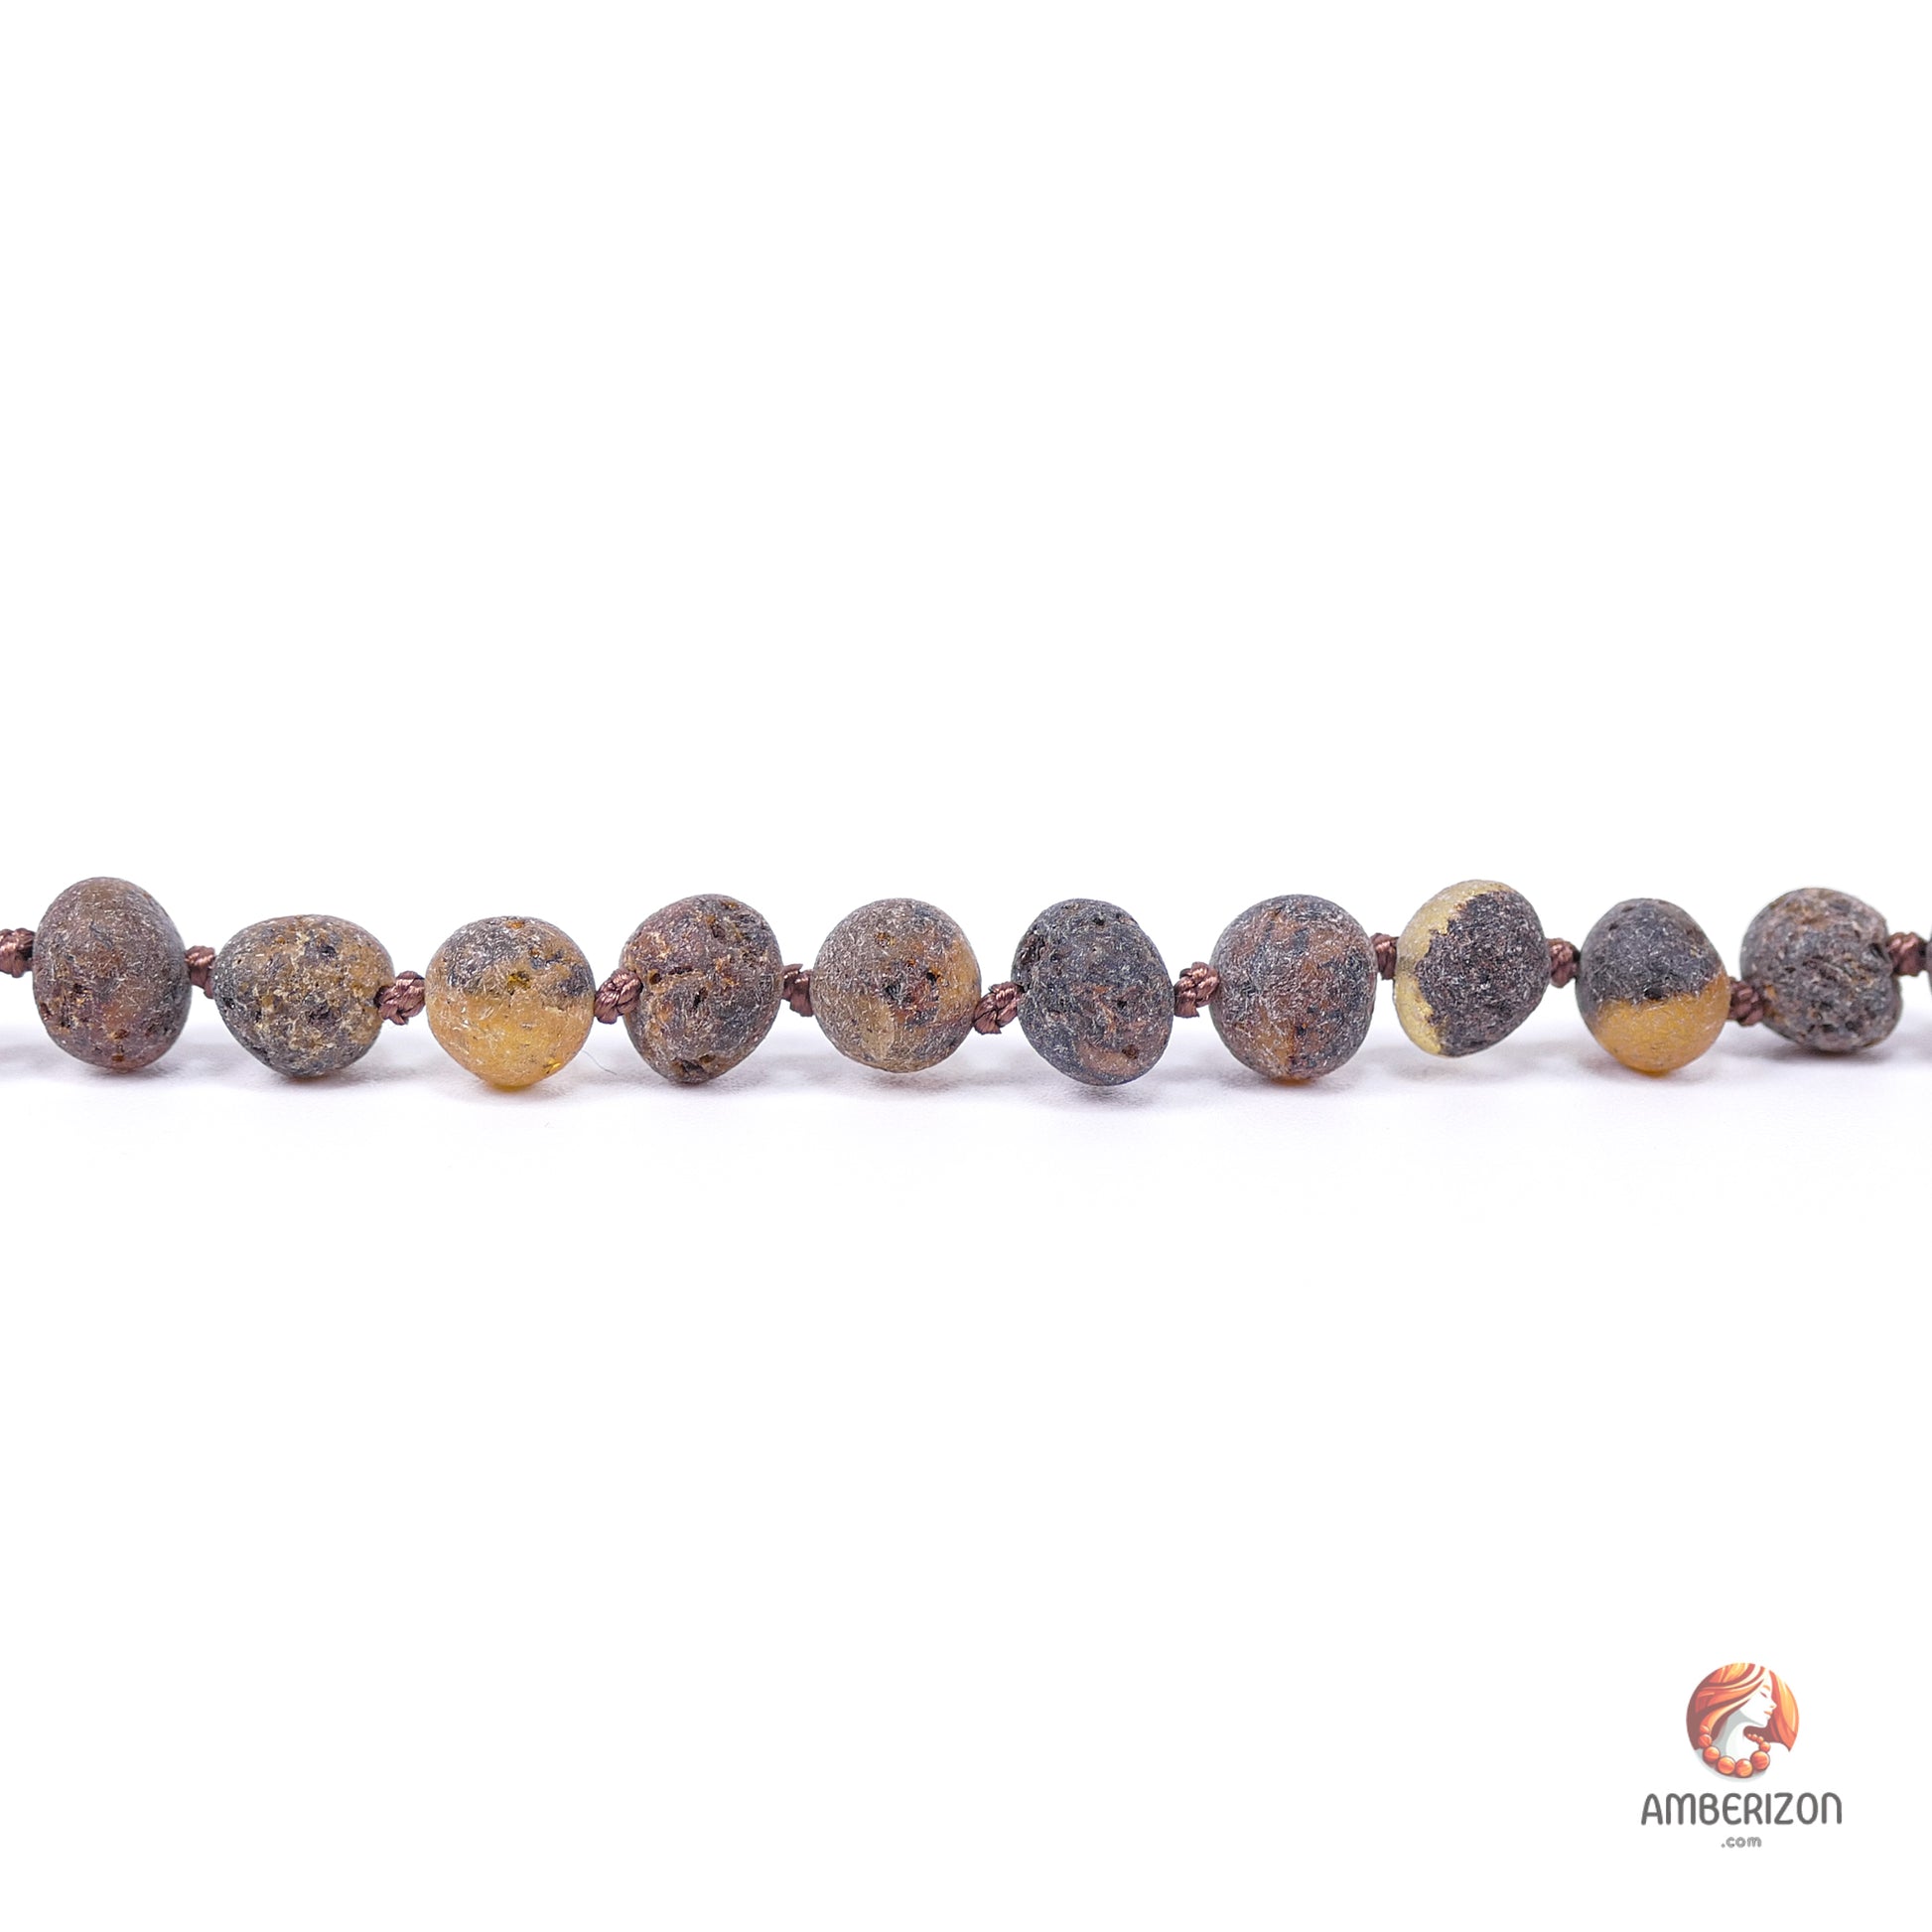 Knotted Baltic amber necklace - Raw amber baroque beads - Woman's amber jewelry